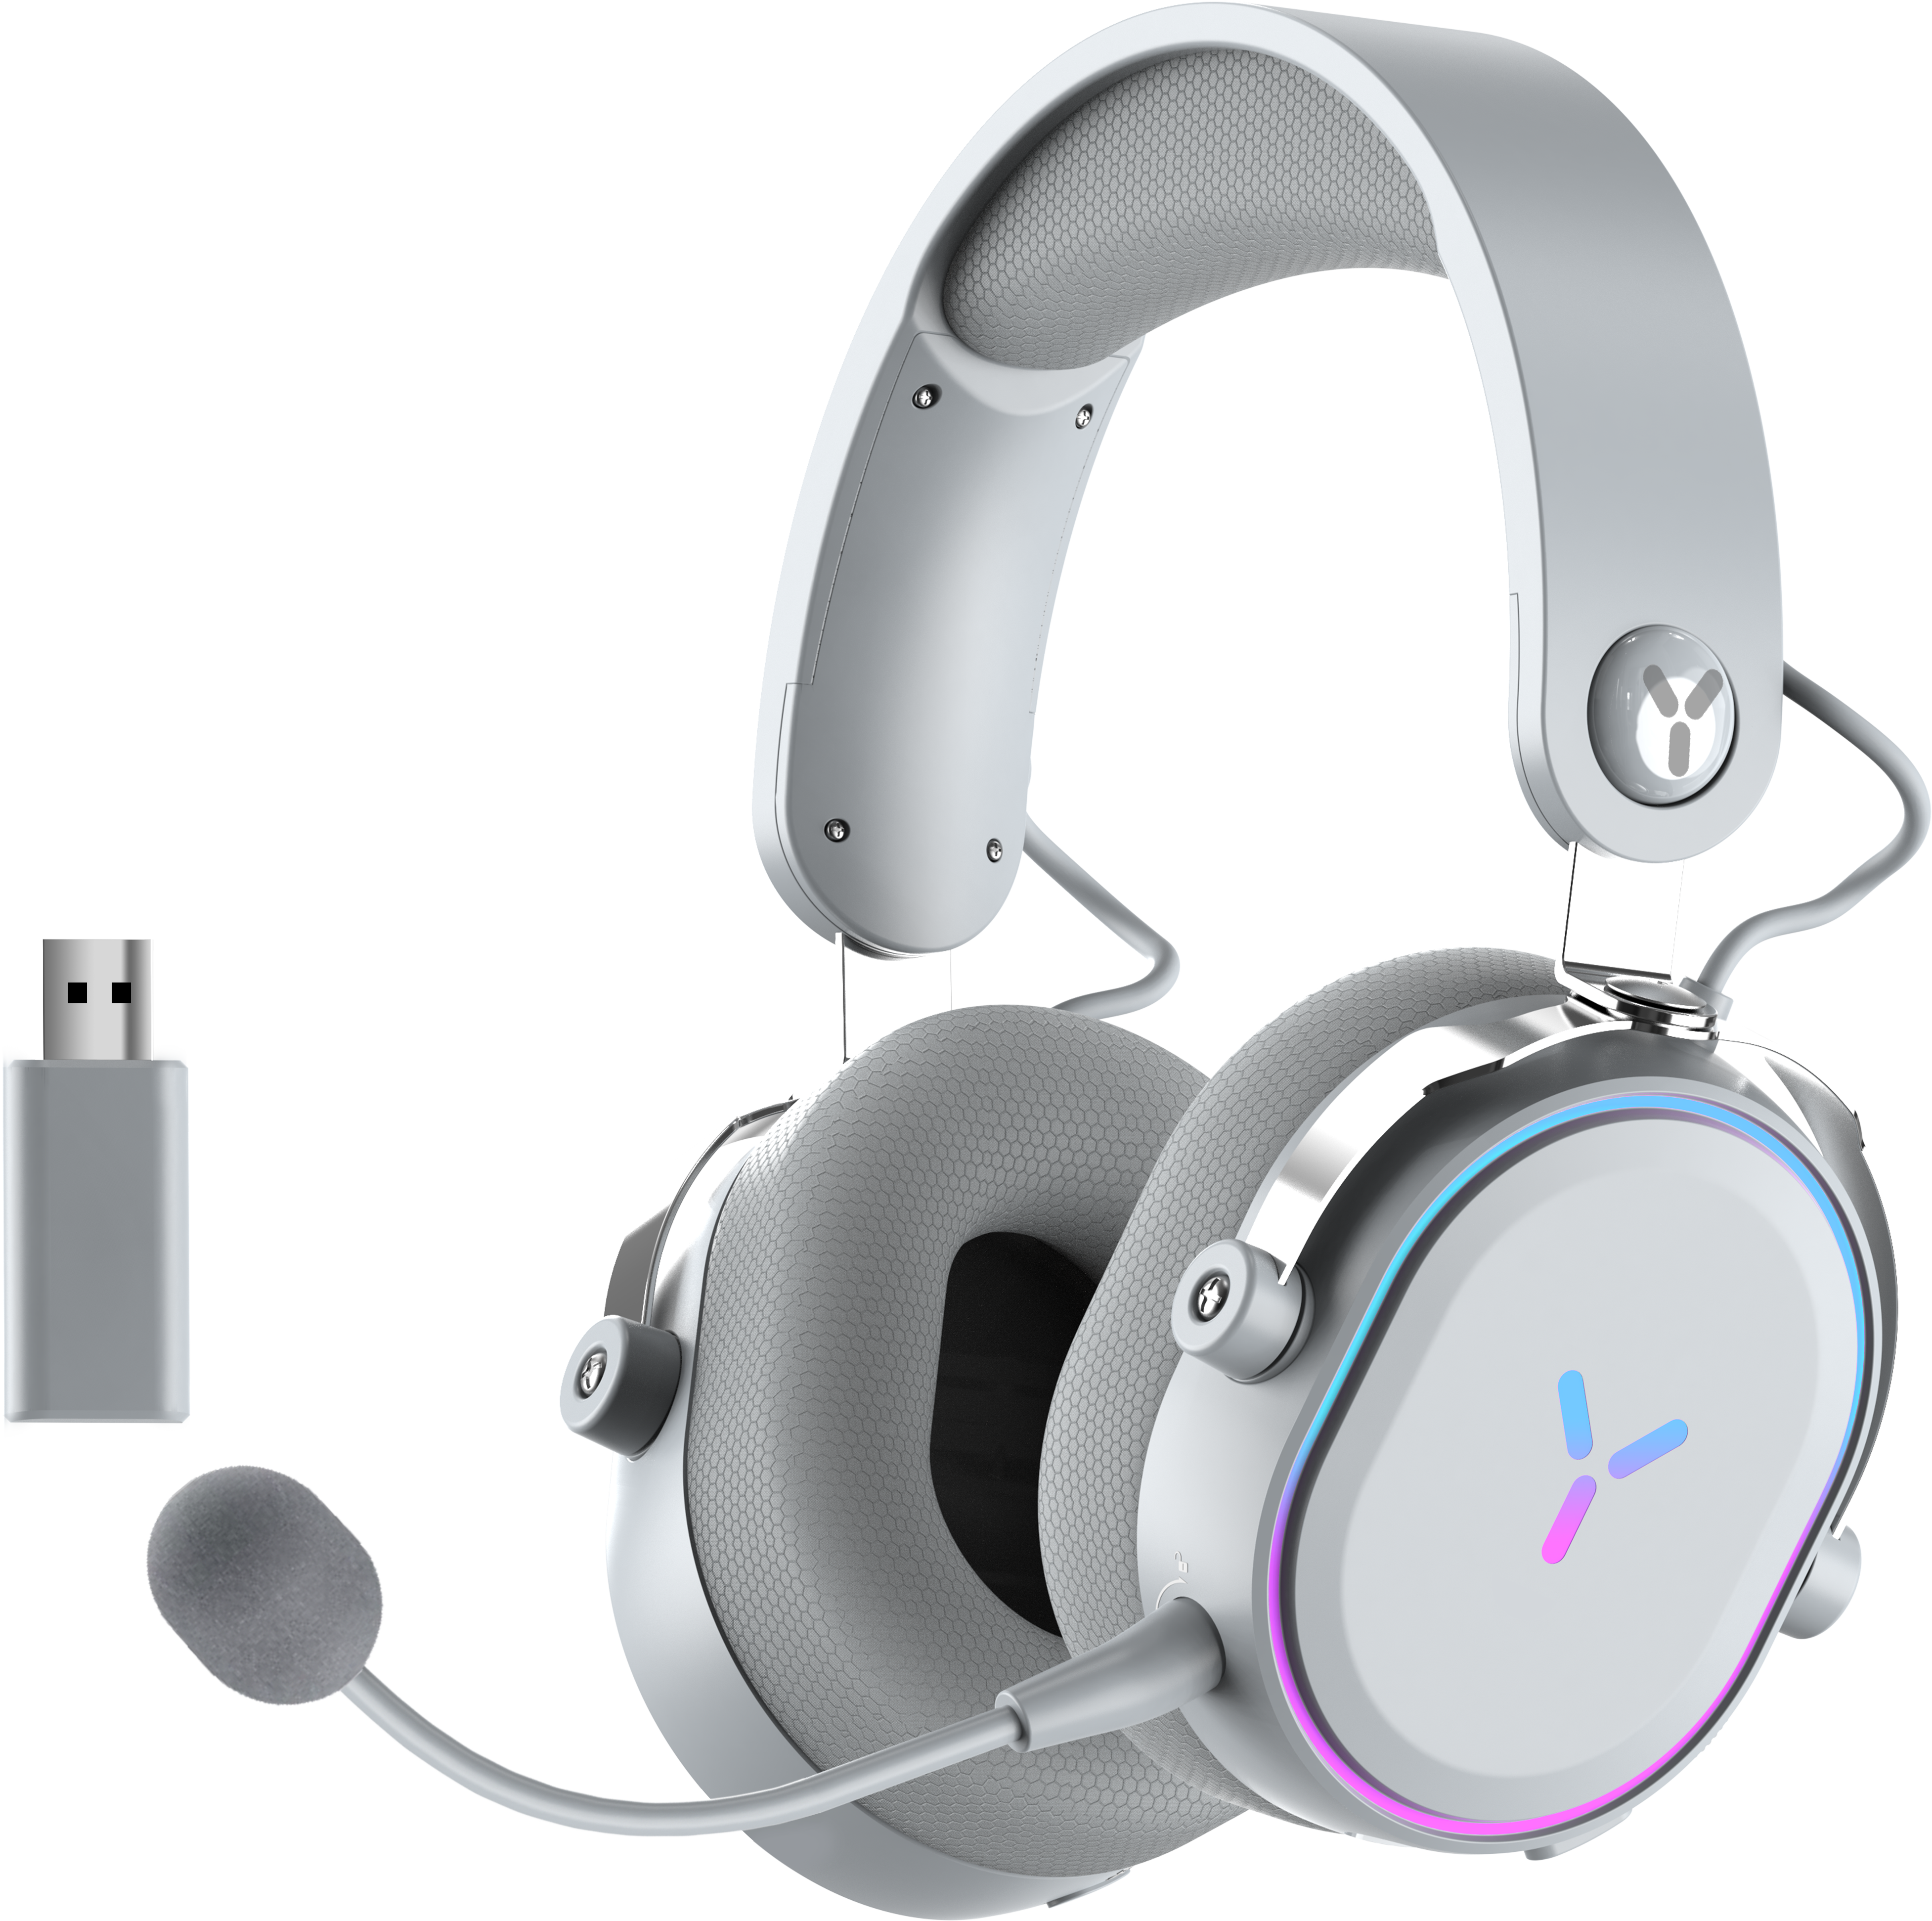 ISY IGH-4000 Wireless Gaming Headset, Over-Ear, RGB-LED, 40mm Treiber, Kabellos, USB-C/3.5mm, Weiß